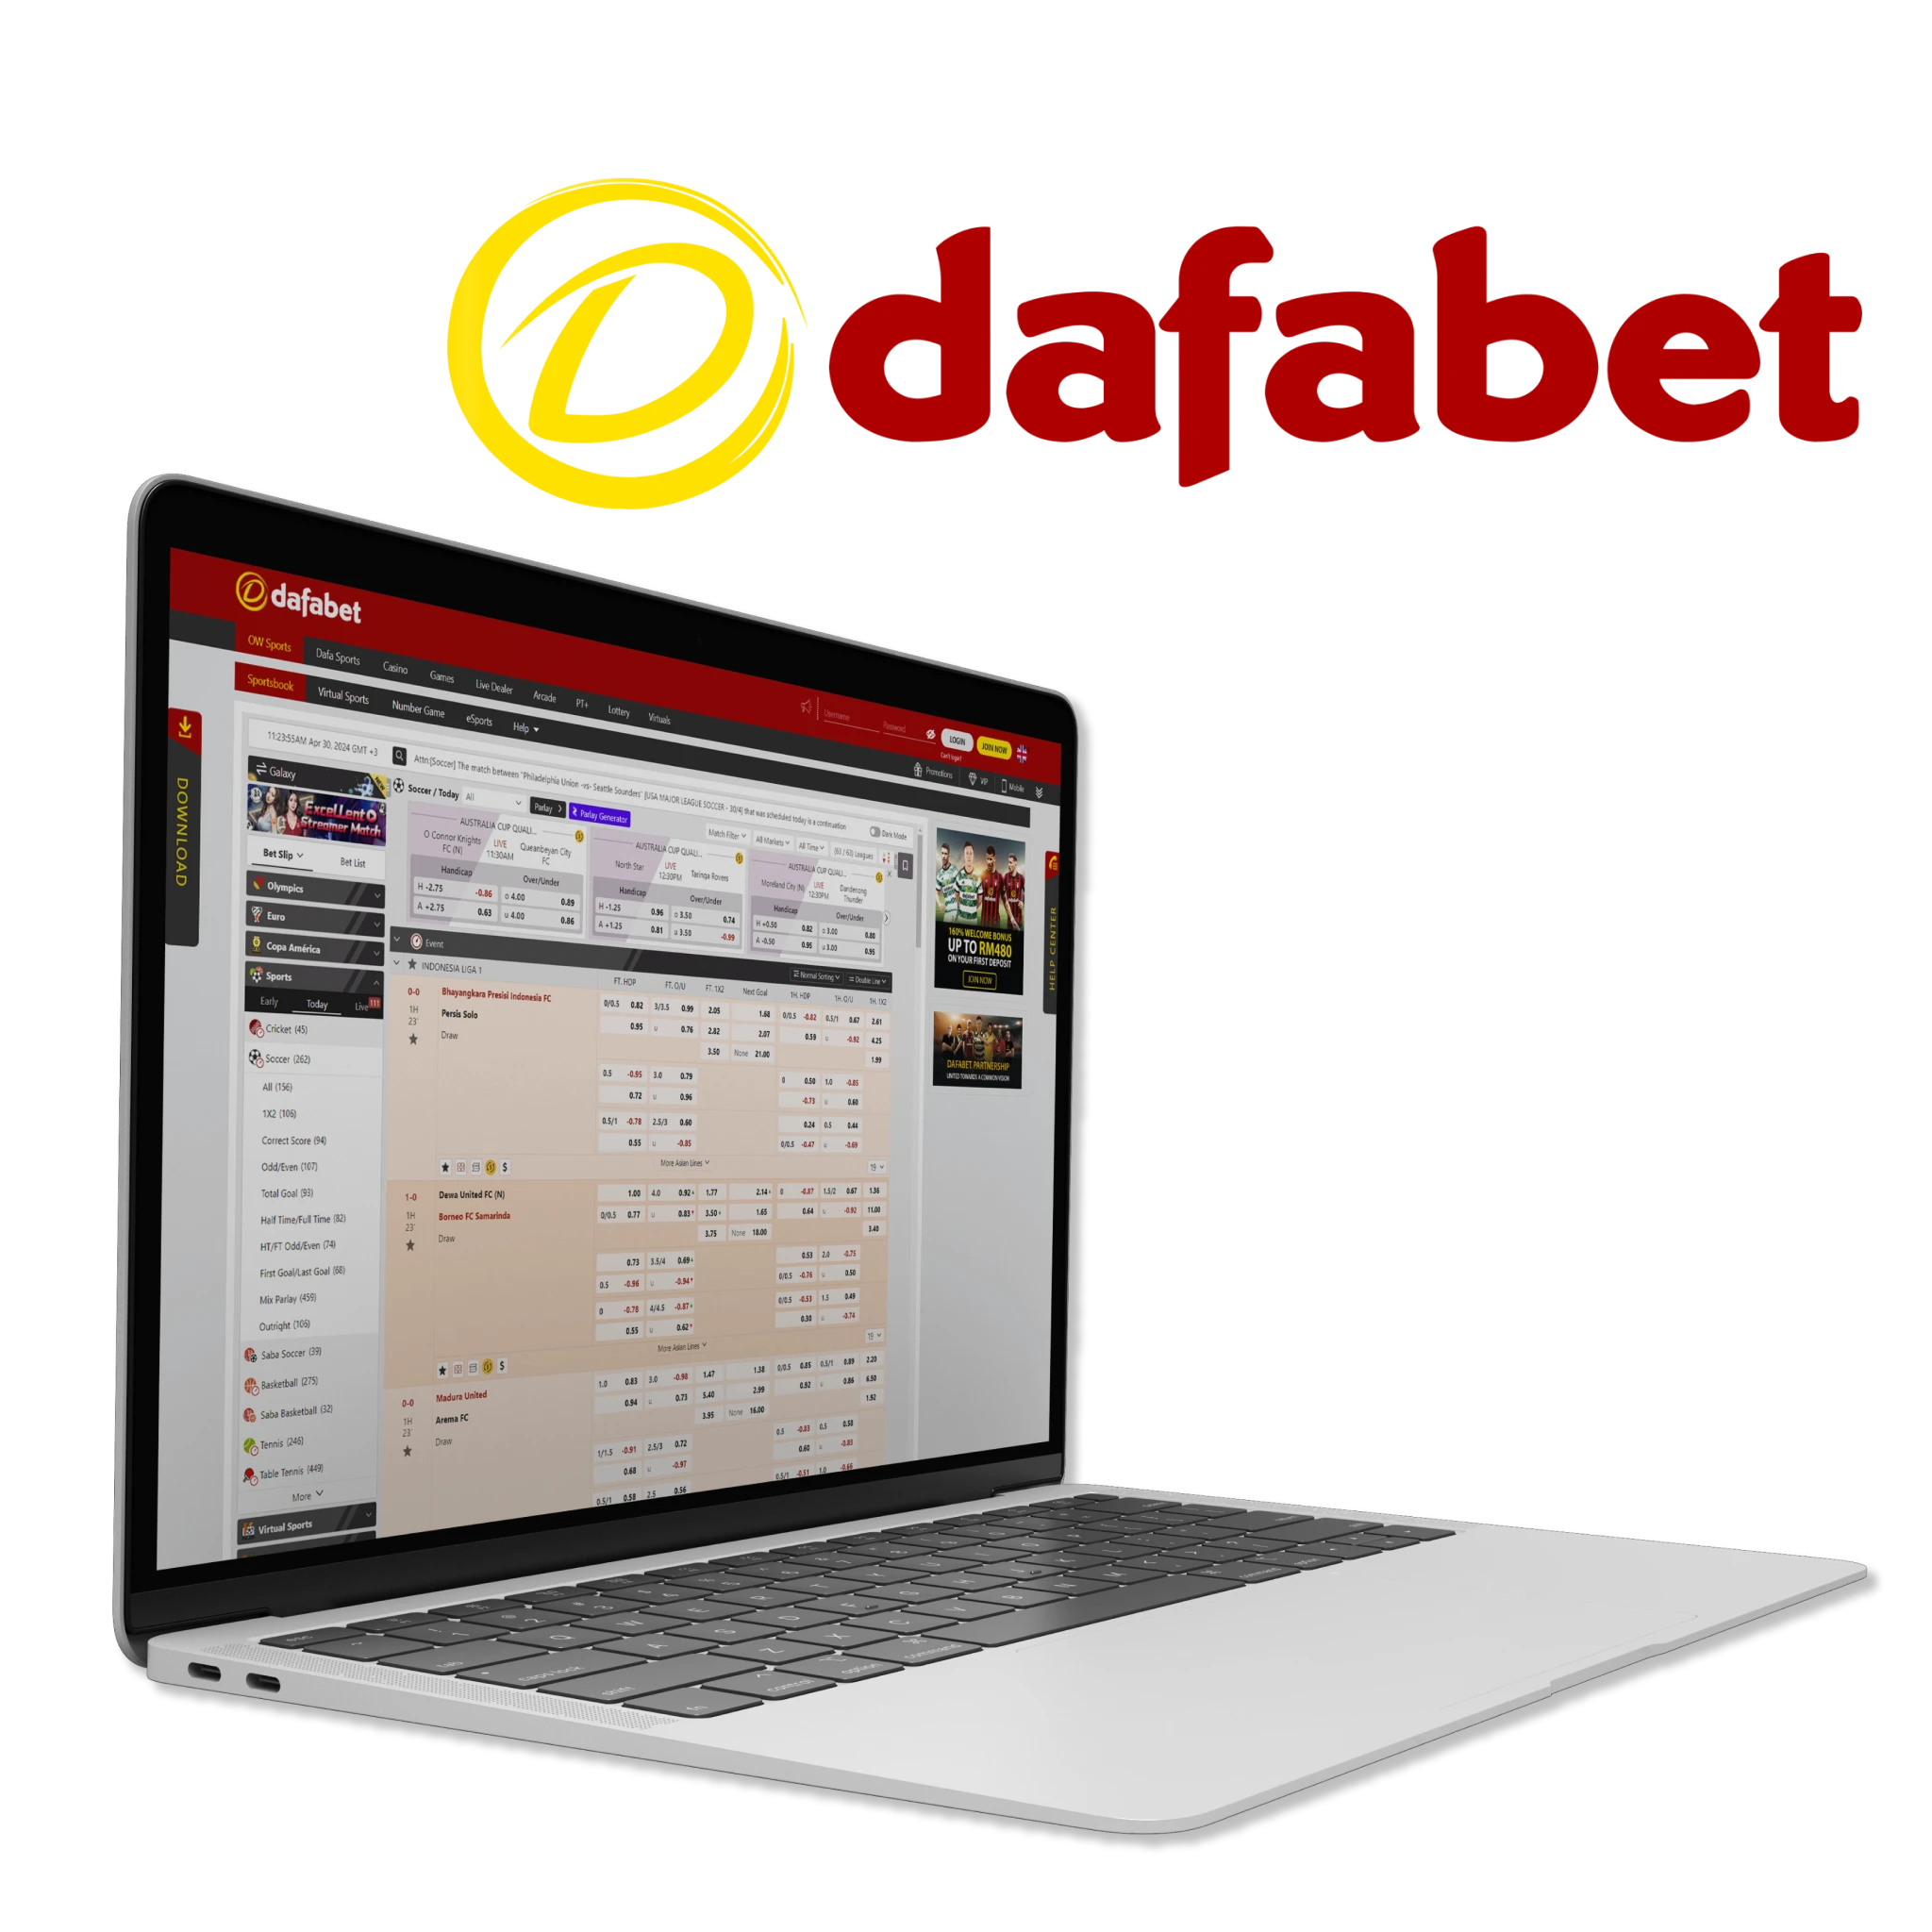 Dafabet is a top-rated site among sports betting enthusiasts.